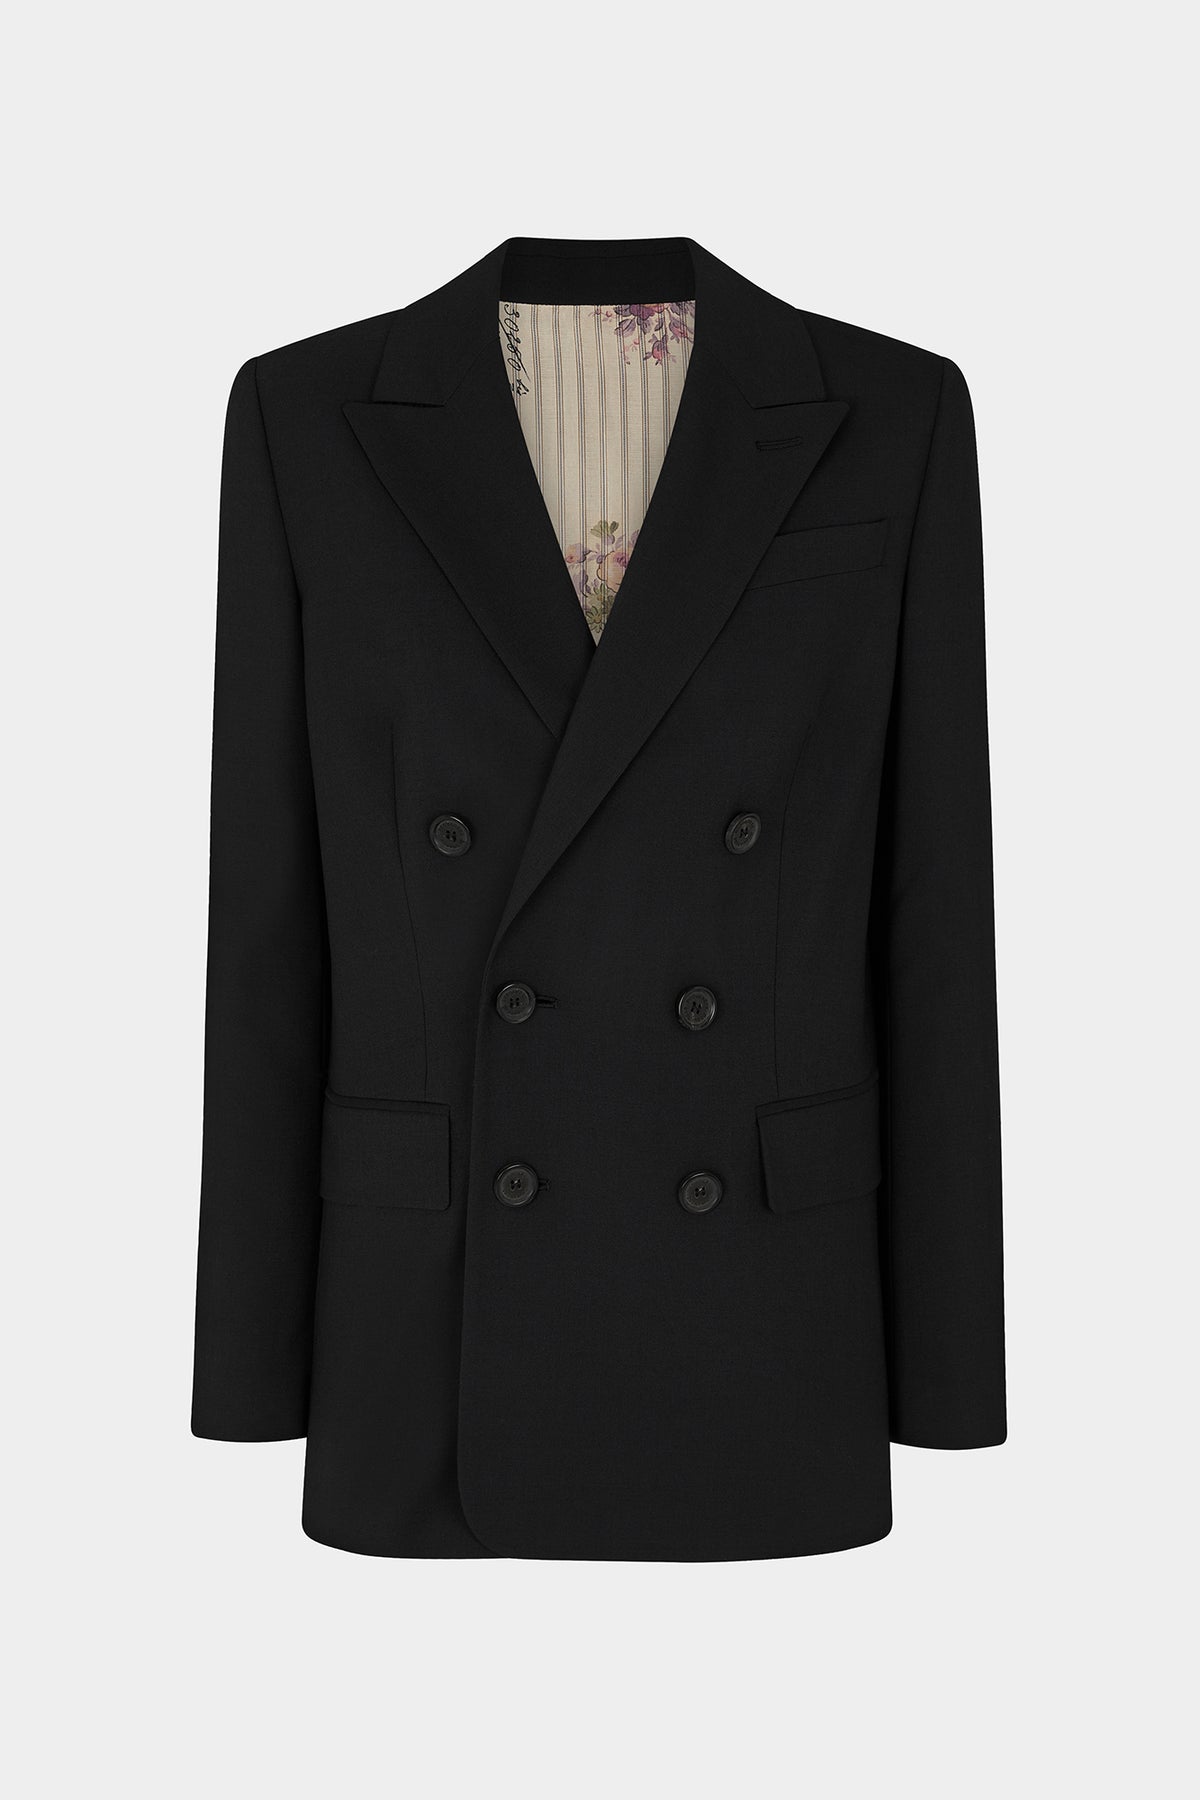 NEW YORKER DOUBLE-BREASTED BLAZER